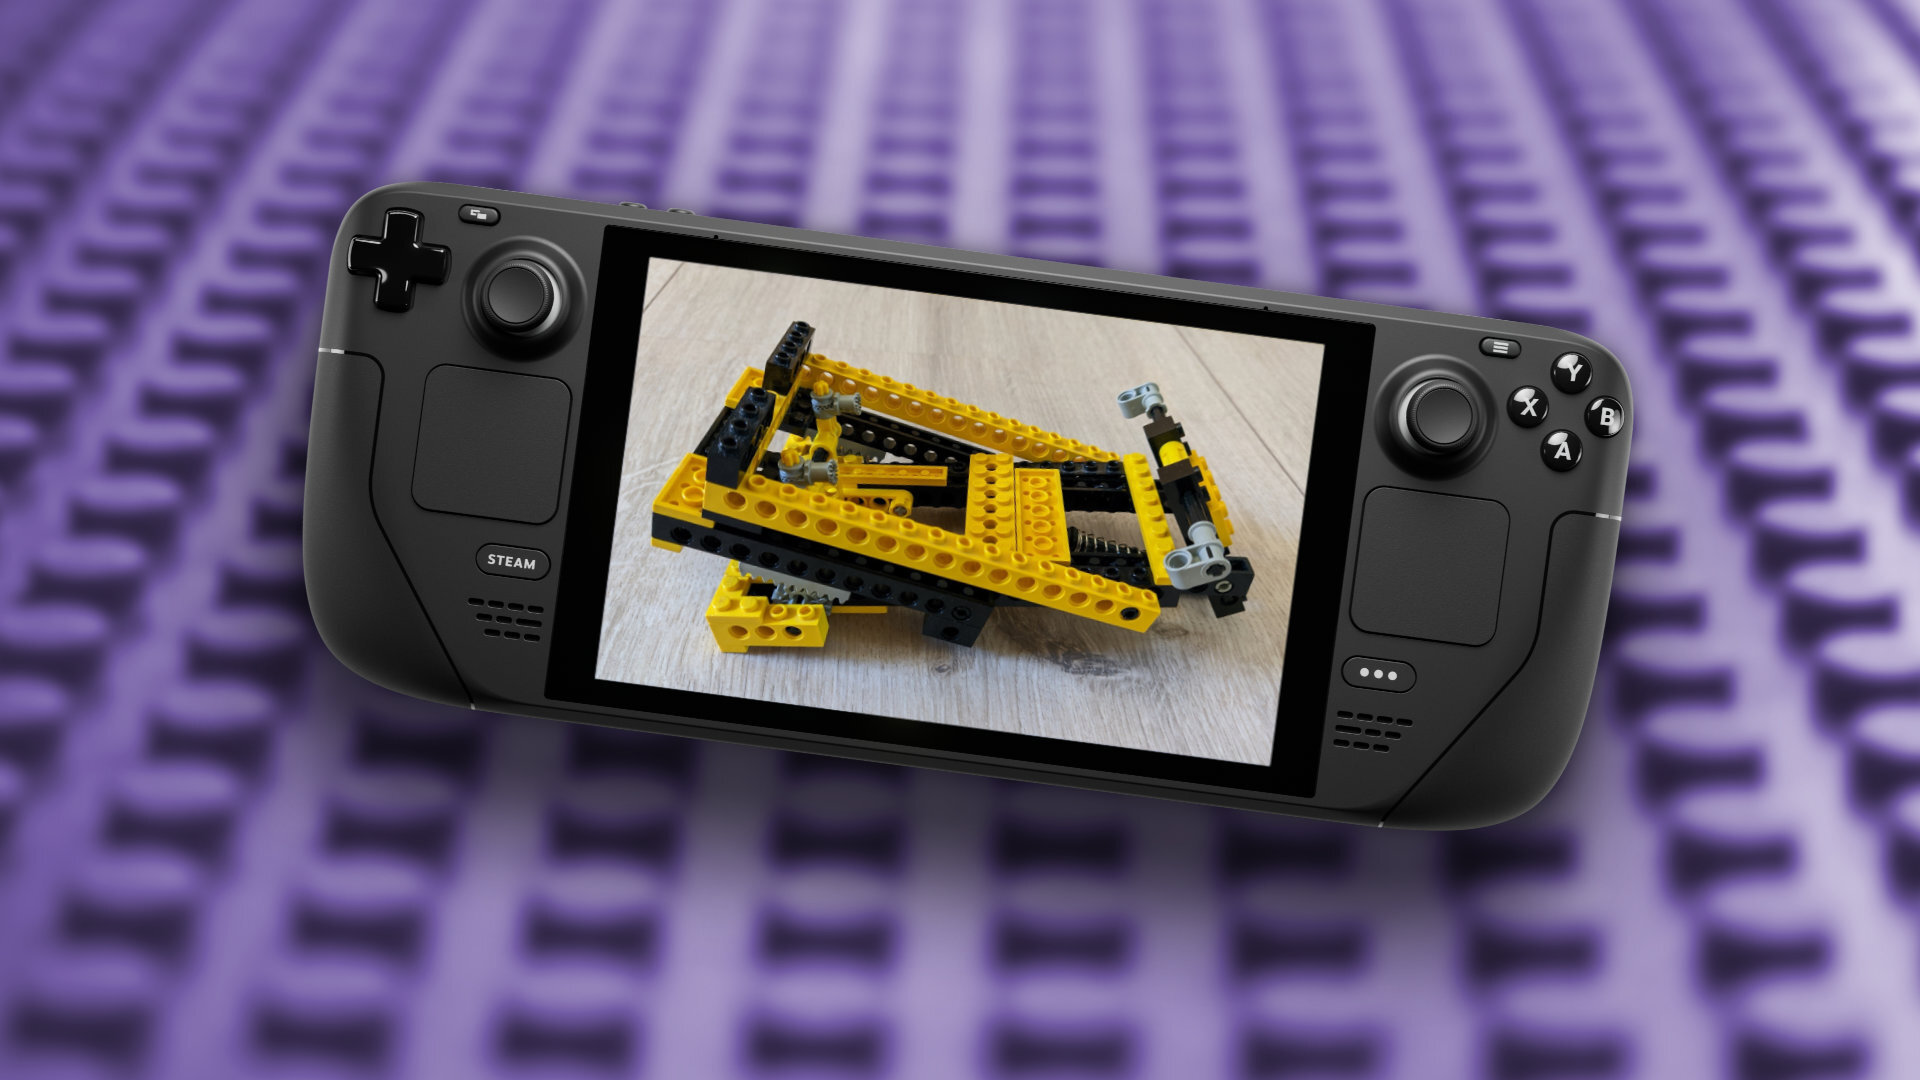 This Lego Steam Deck stand gives 3D printing a run for its money